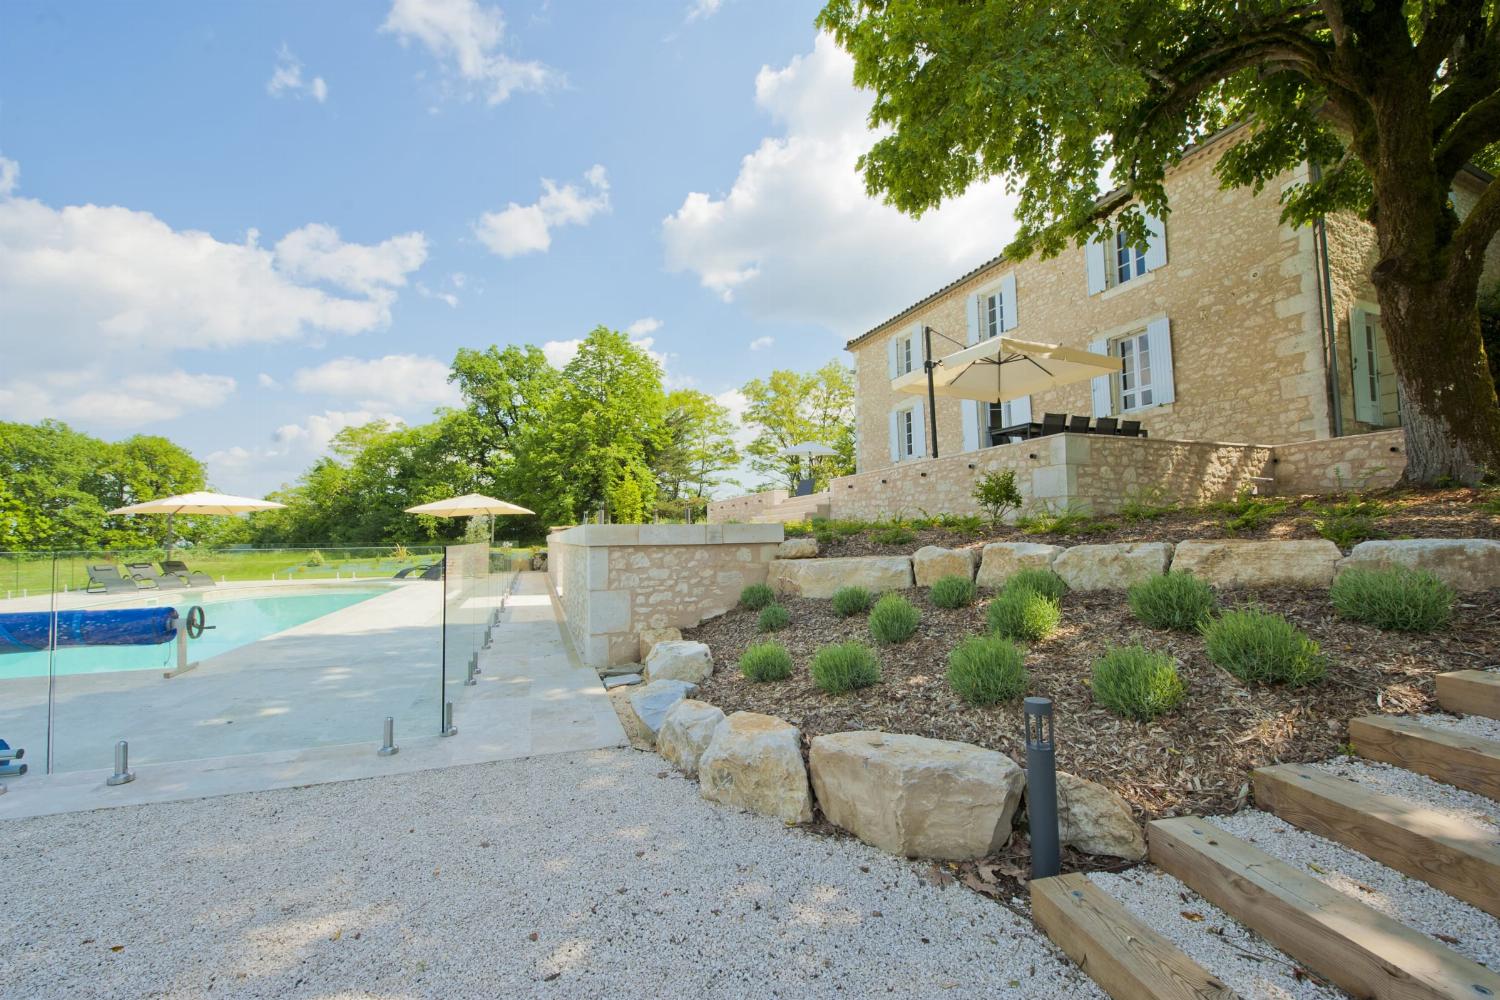 Rental home in Dordogne with private heated pool